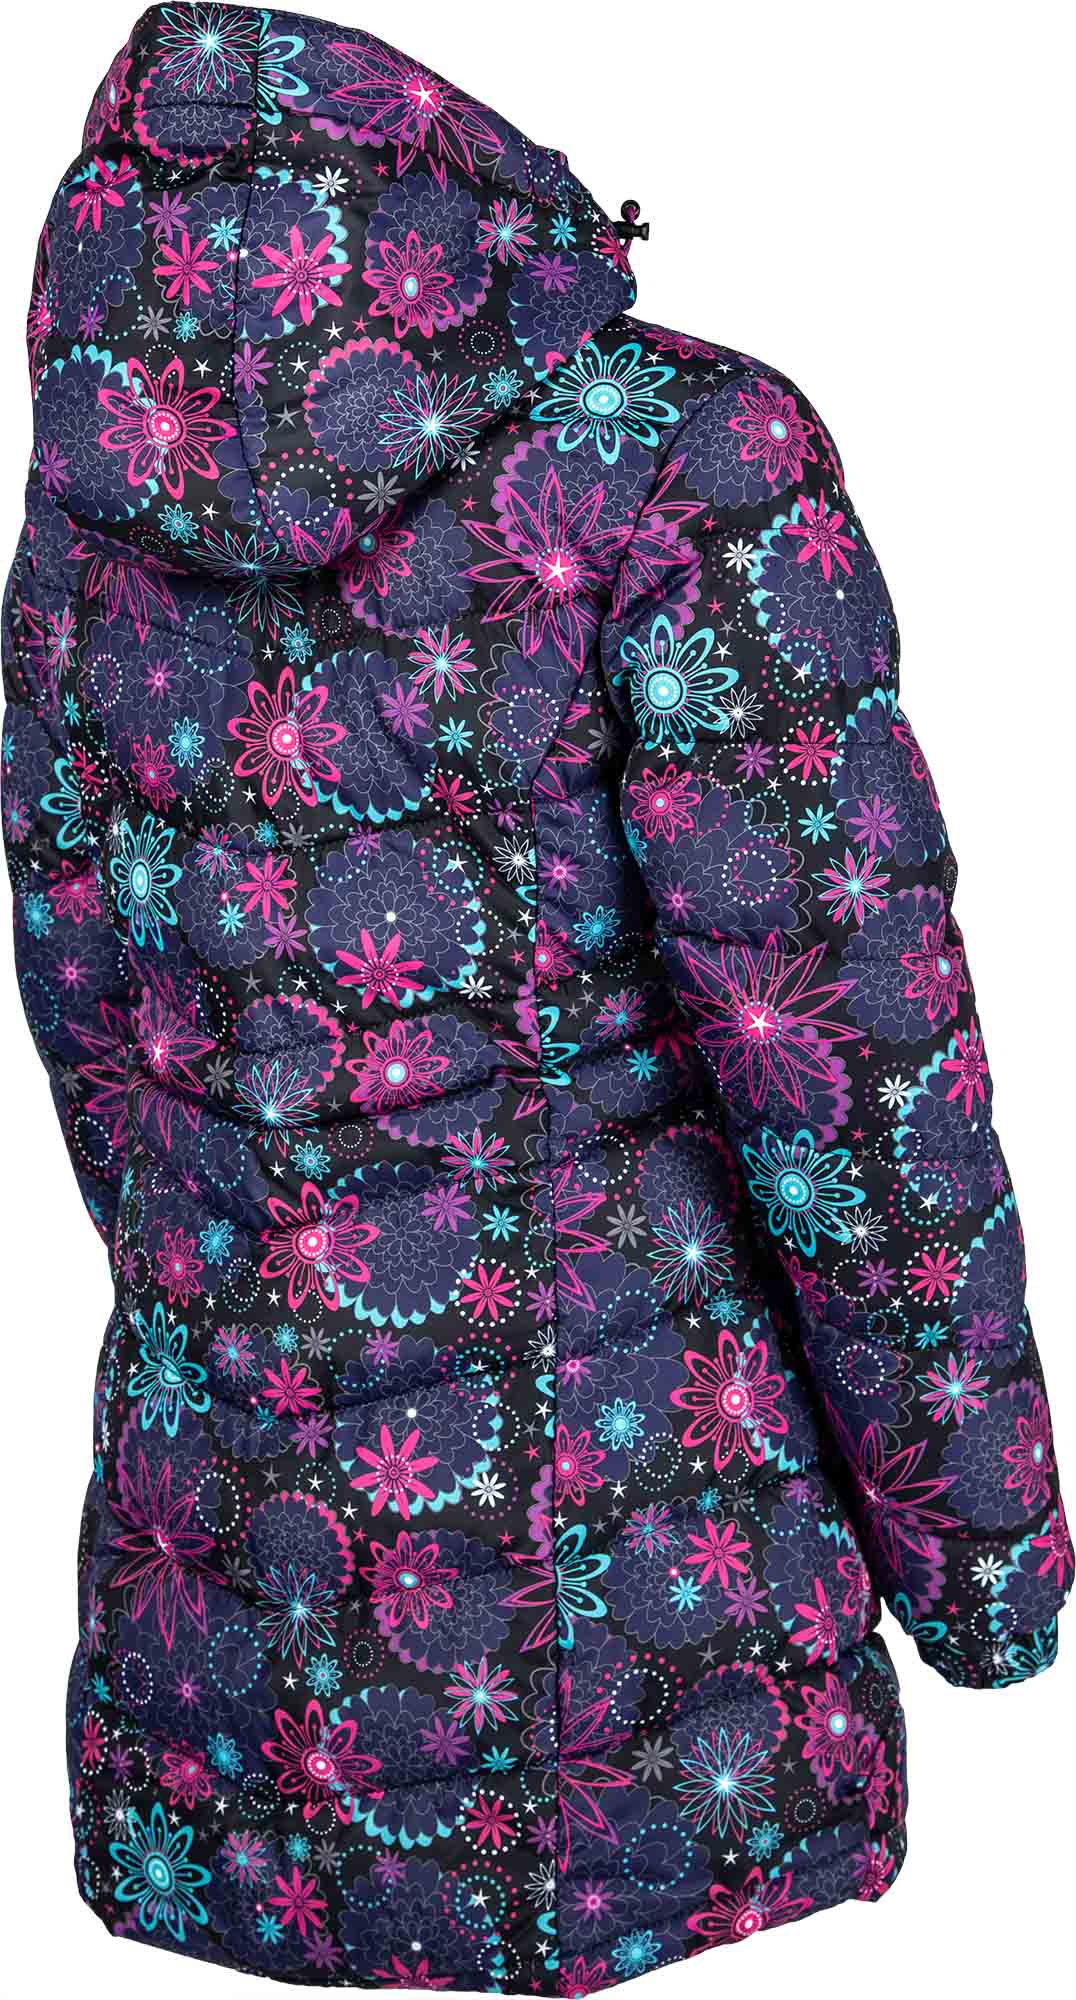 Girls’ quilted coat